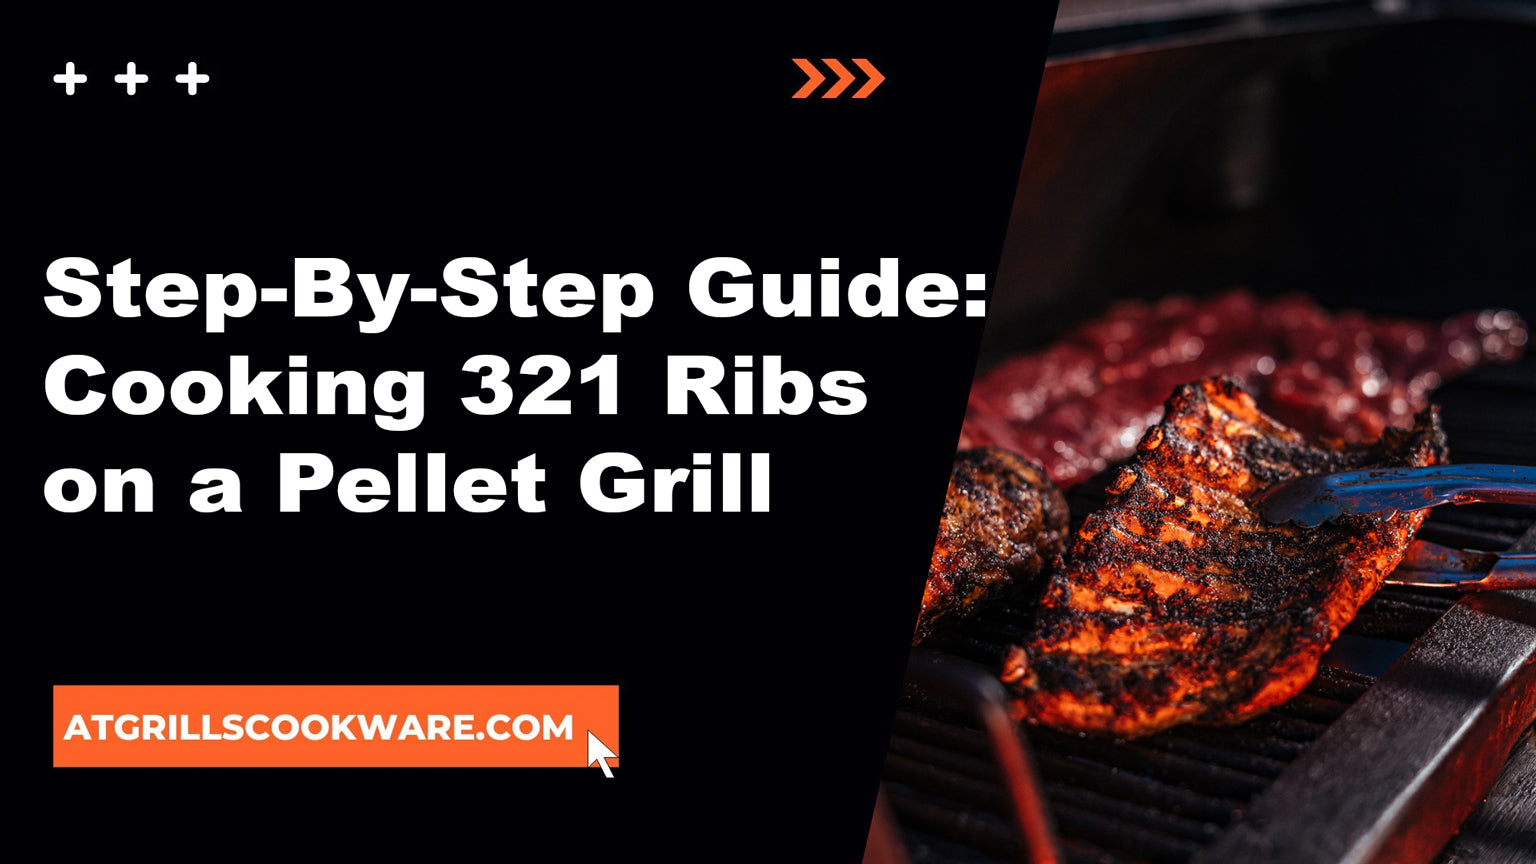 Savor the Smoke: The Ultimate Step-By-Step Guide to Cooking 321 Ribs on a Pellet Grill